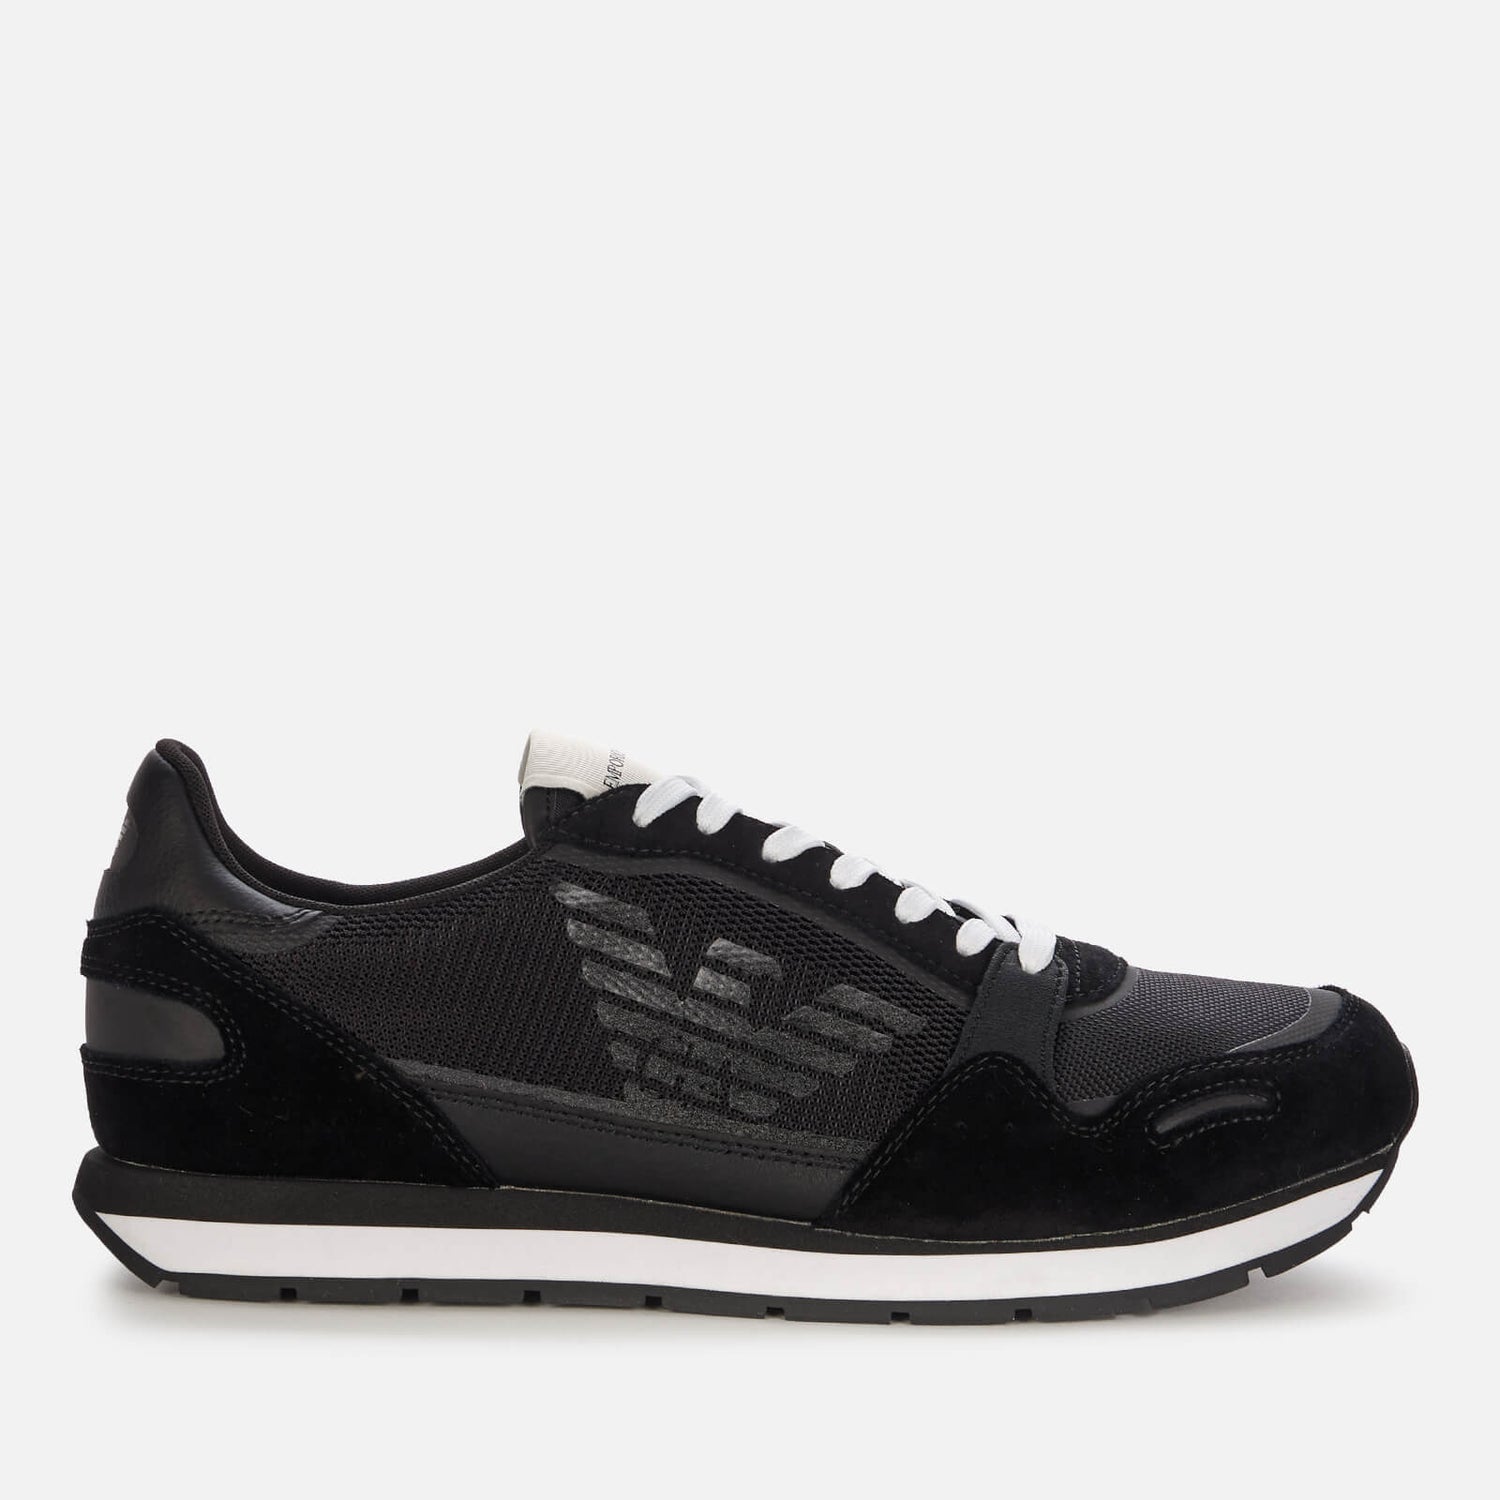 Emporio Armani Men's Running Style Trainers - Black | FREE UK Delivery ...